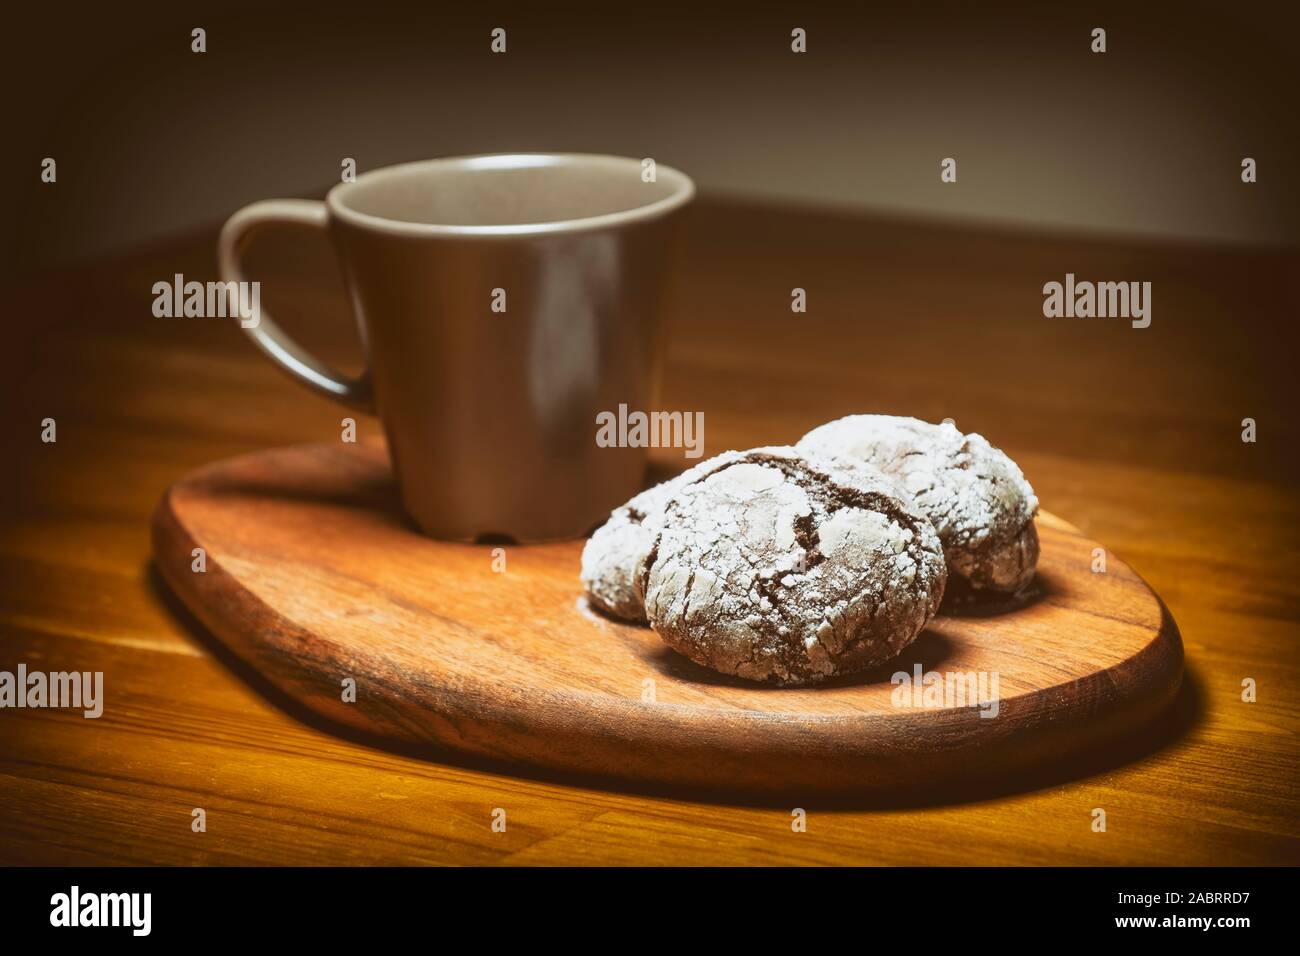 Coffee Cup And Cracked Chocolate Cookies Stock Photo